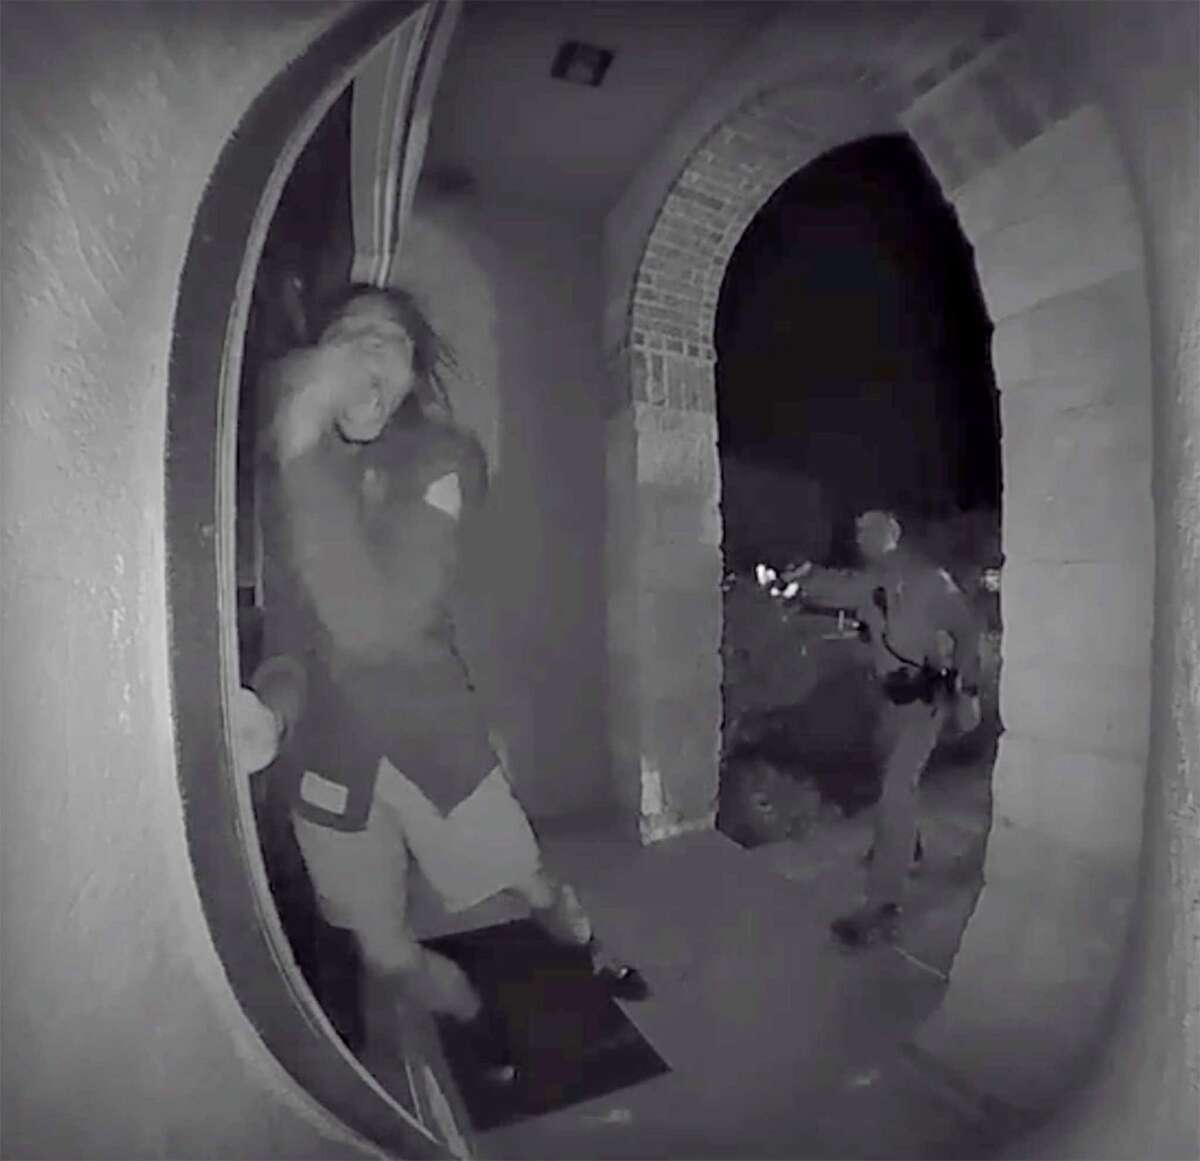 A screen grab from a home surveillance video shows a Schertz police officer using a Taser on Zekee Rayford, 18, as he pounds on the front door of his home while calling for his parents. Police said he ran a red light and failed to pull over.